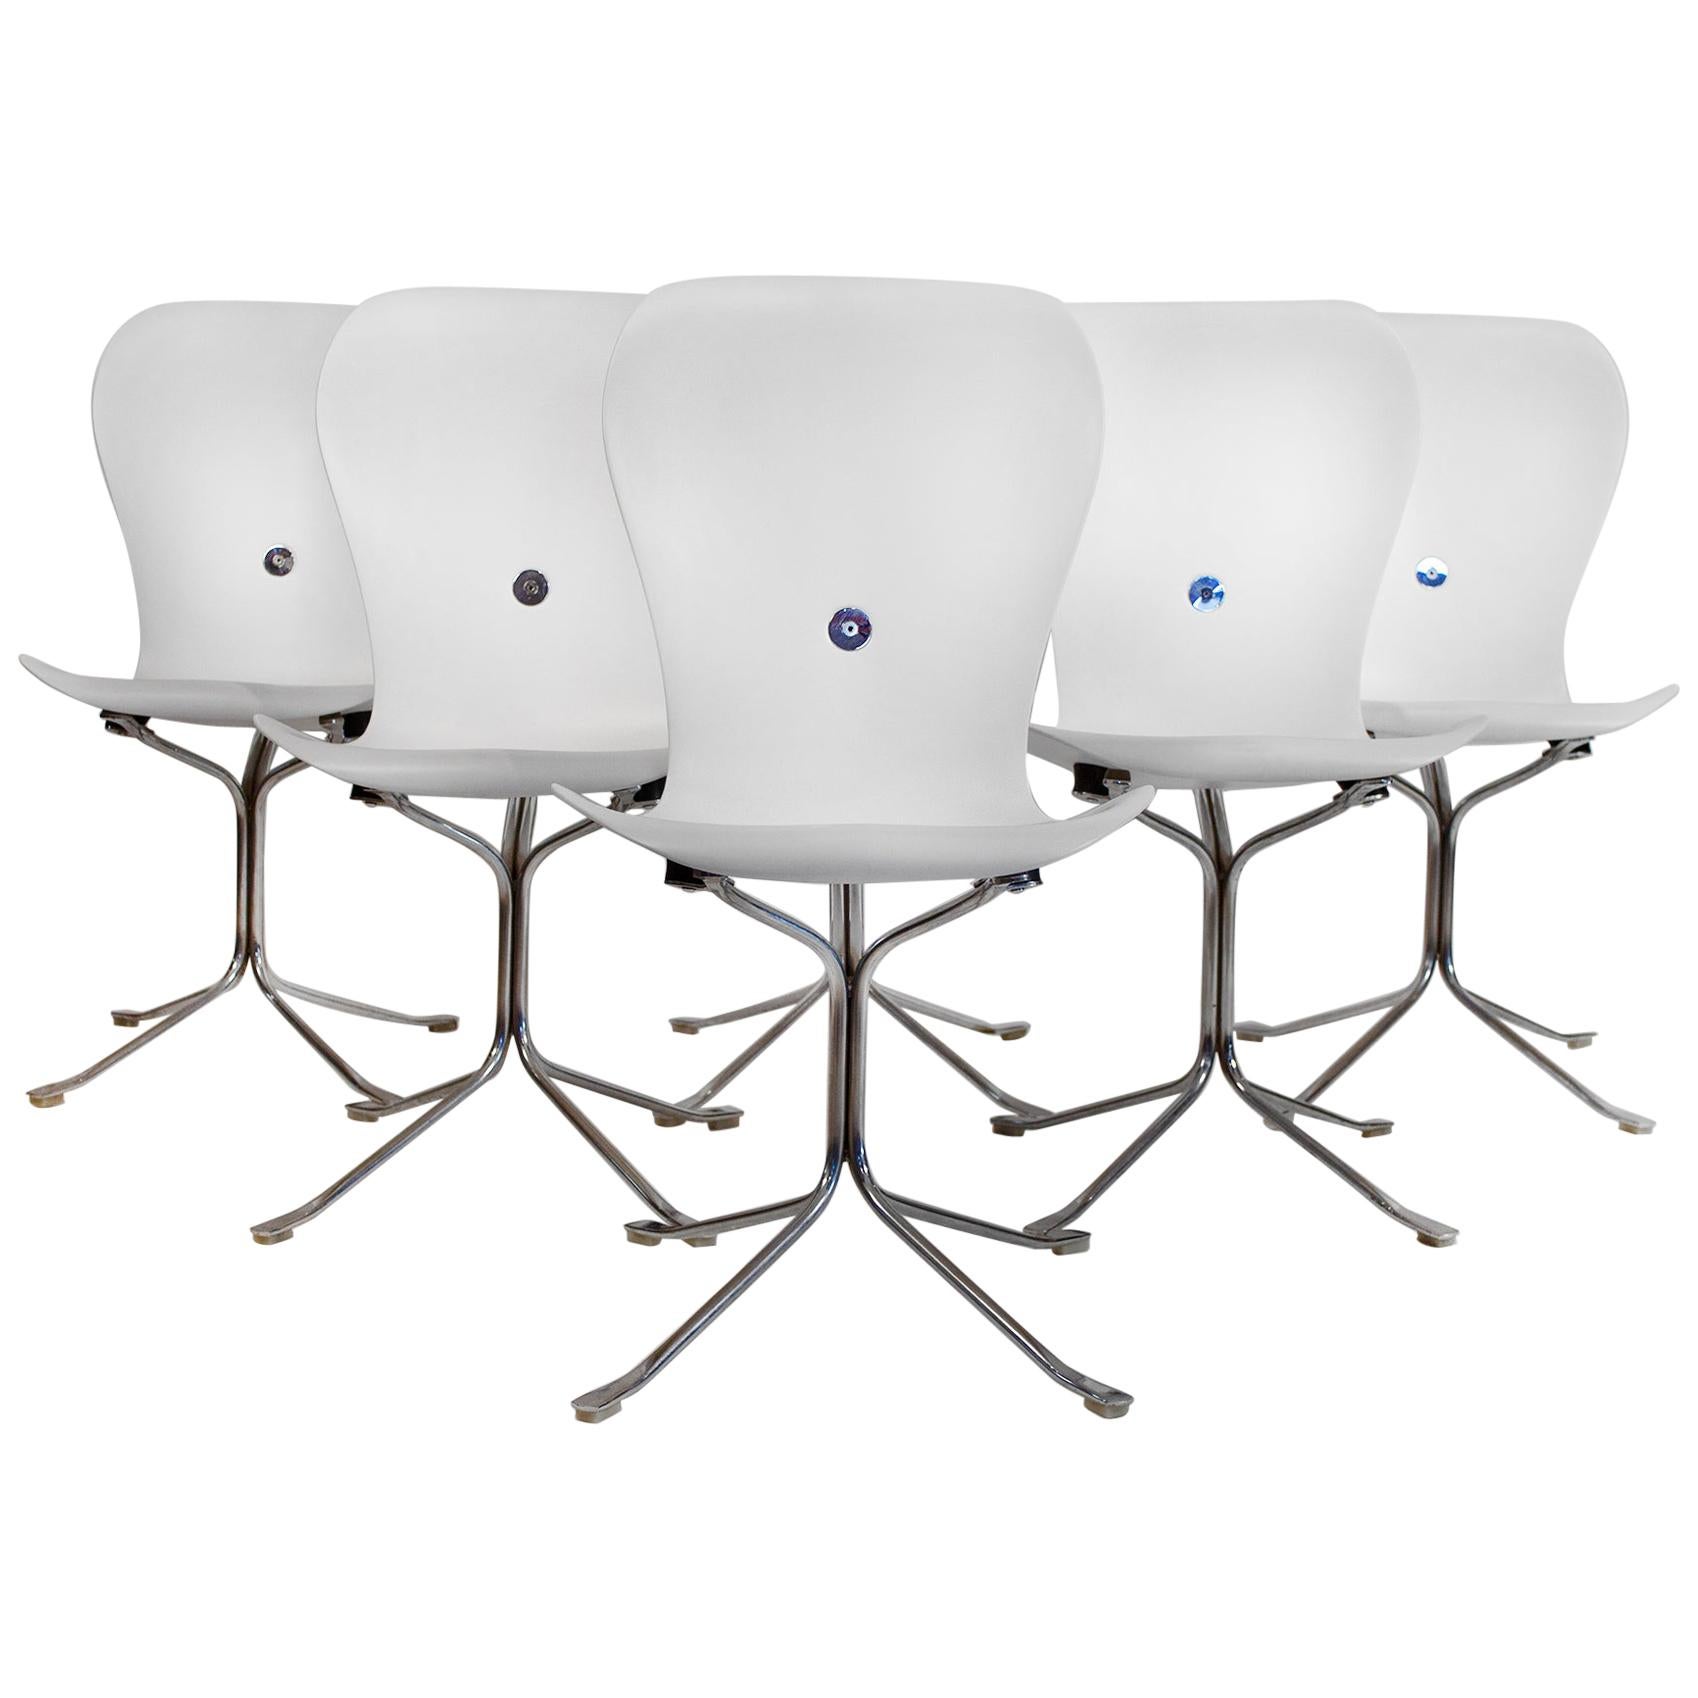 Gideon Kramer Ion Dining Chairs Set of Six in Flat White